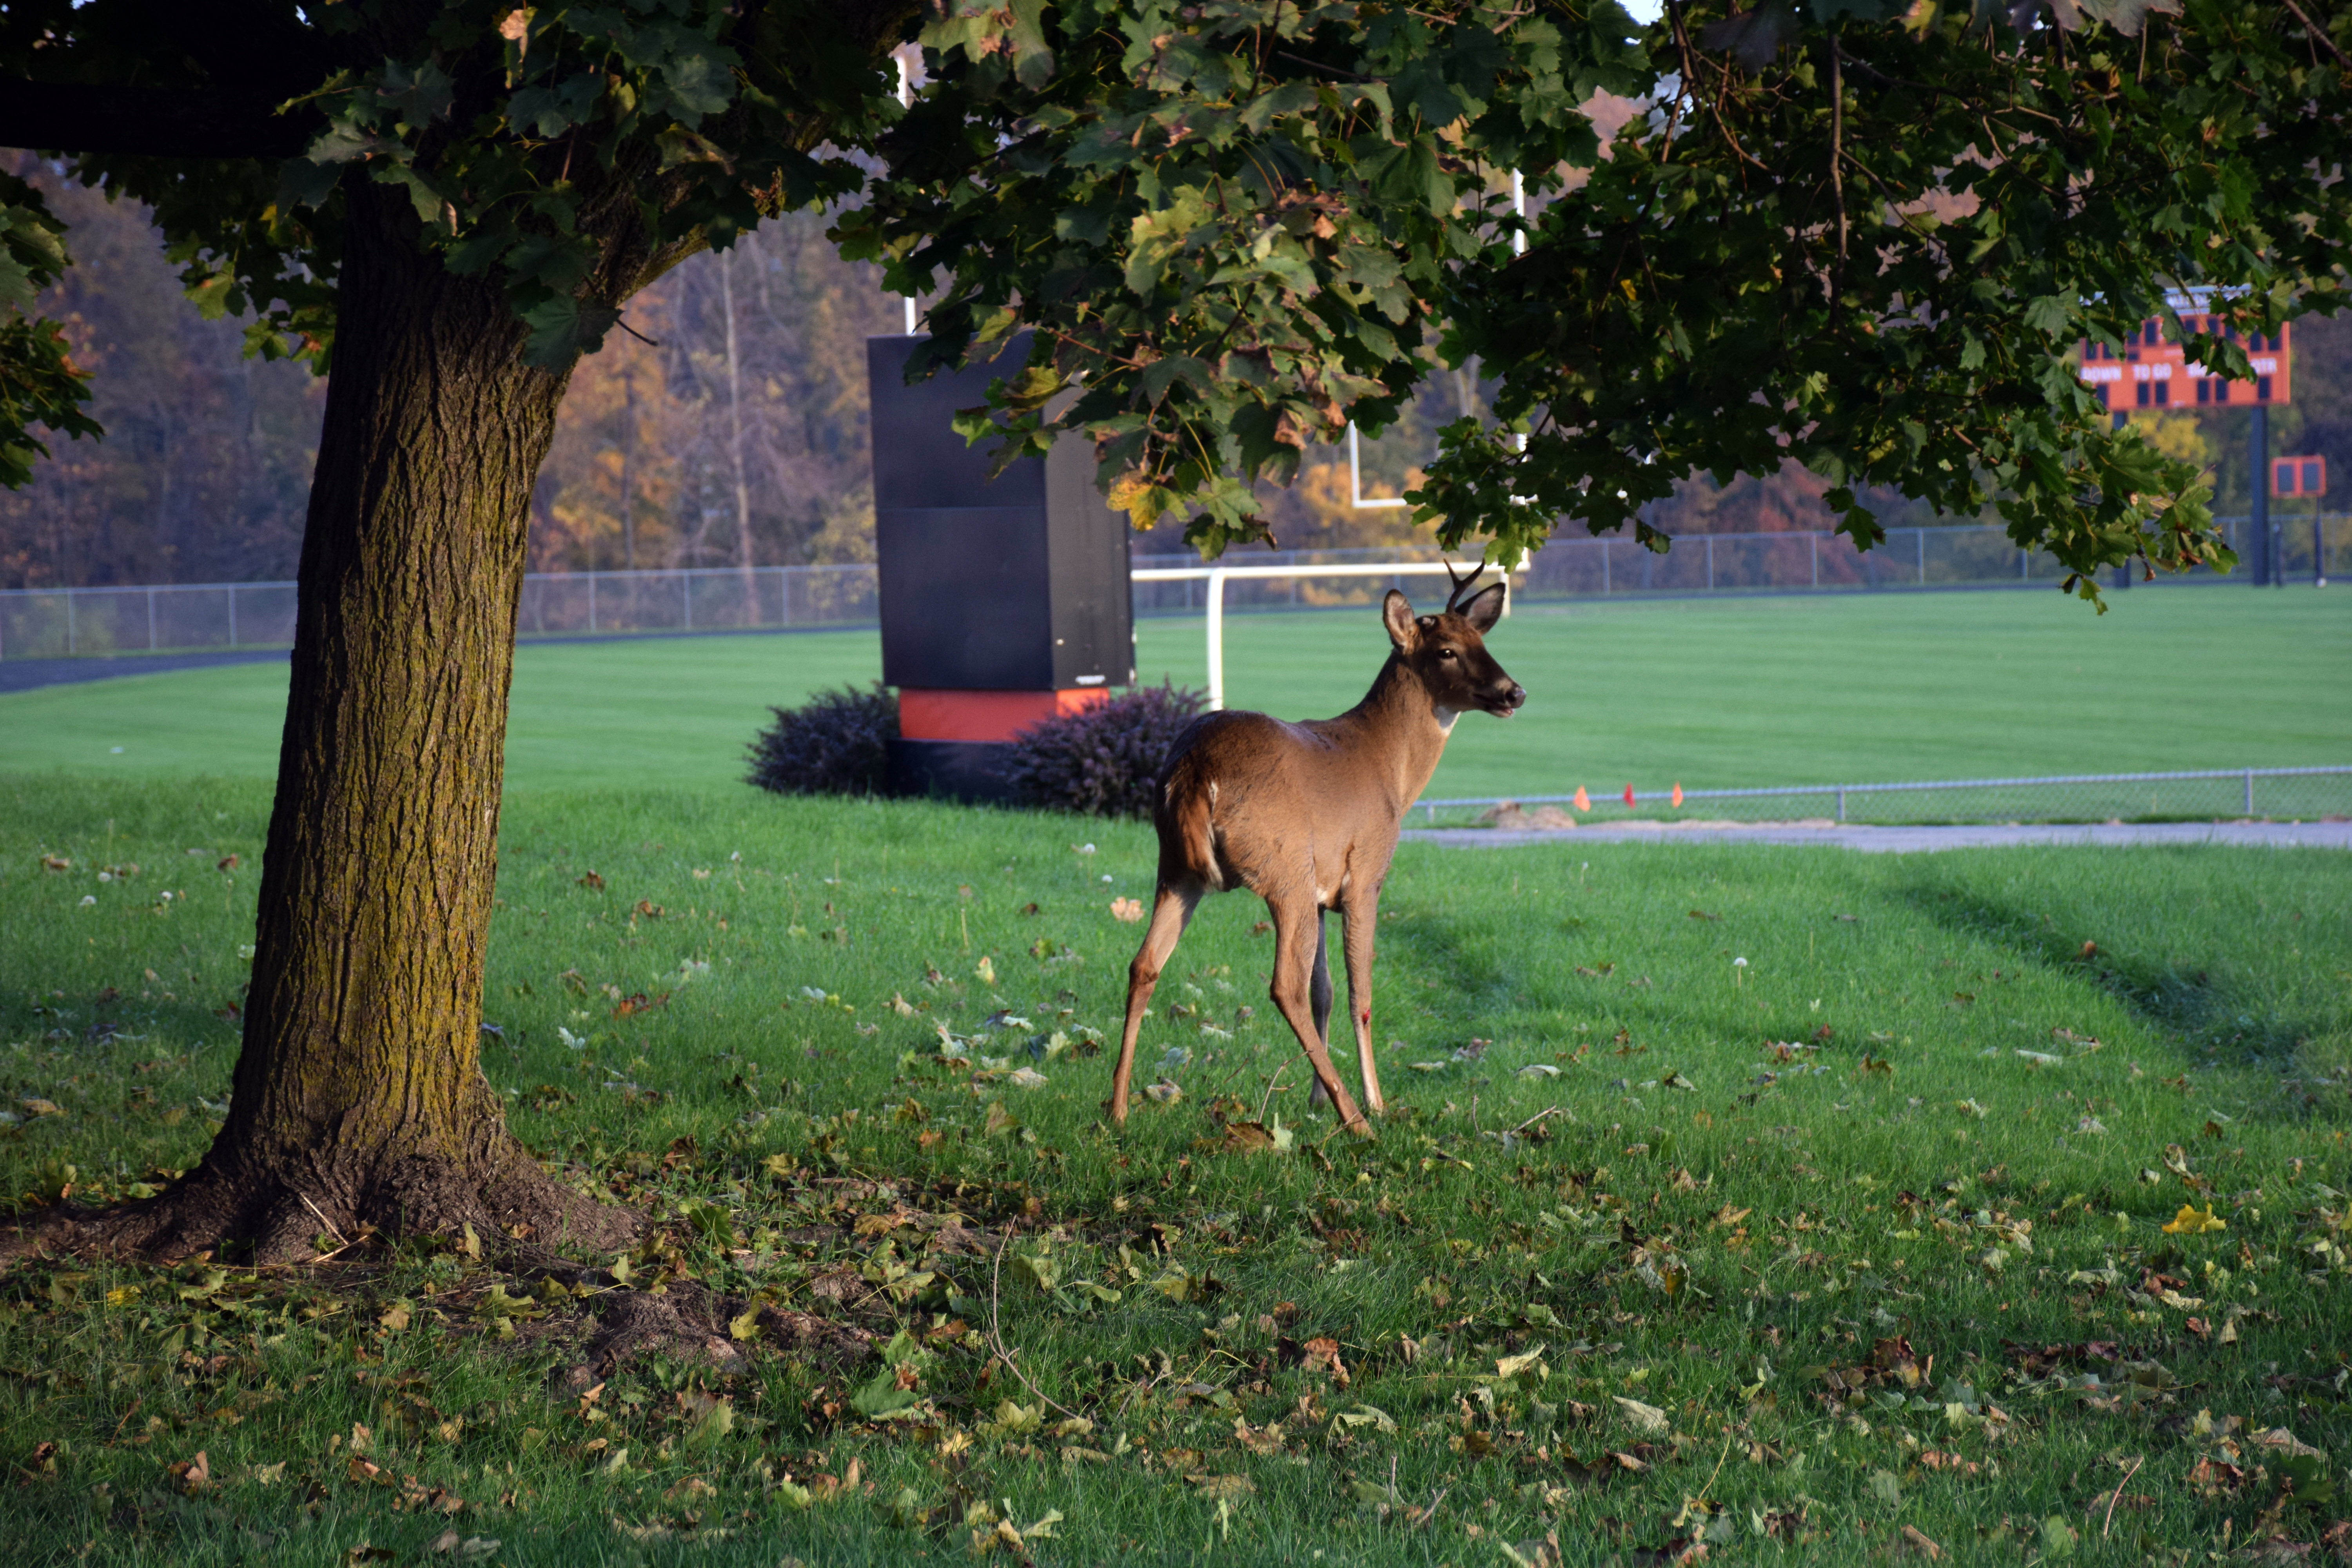 The deer stood up and ran off into nearby woods, appearing to be unhurt.